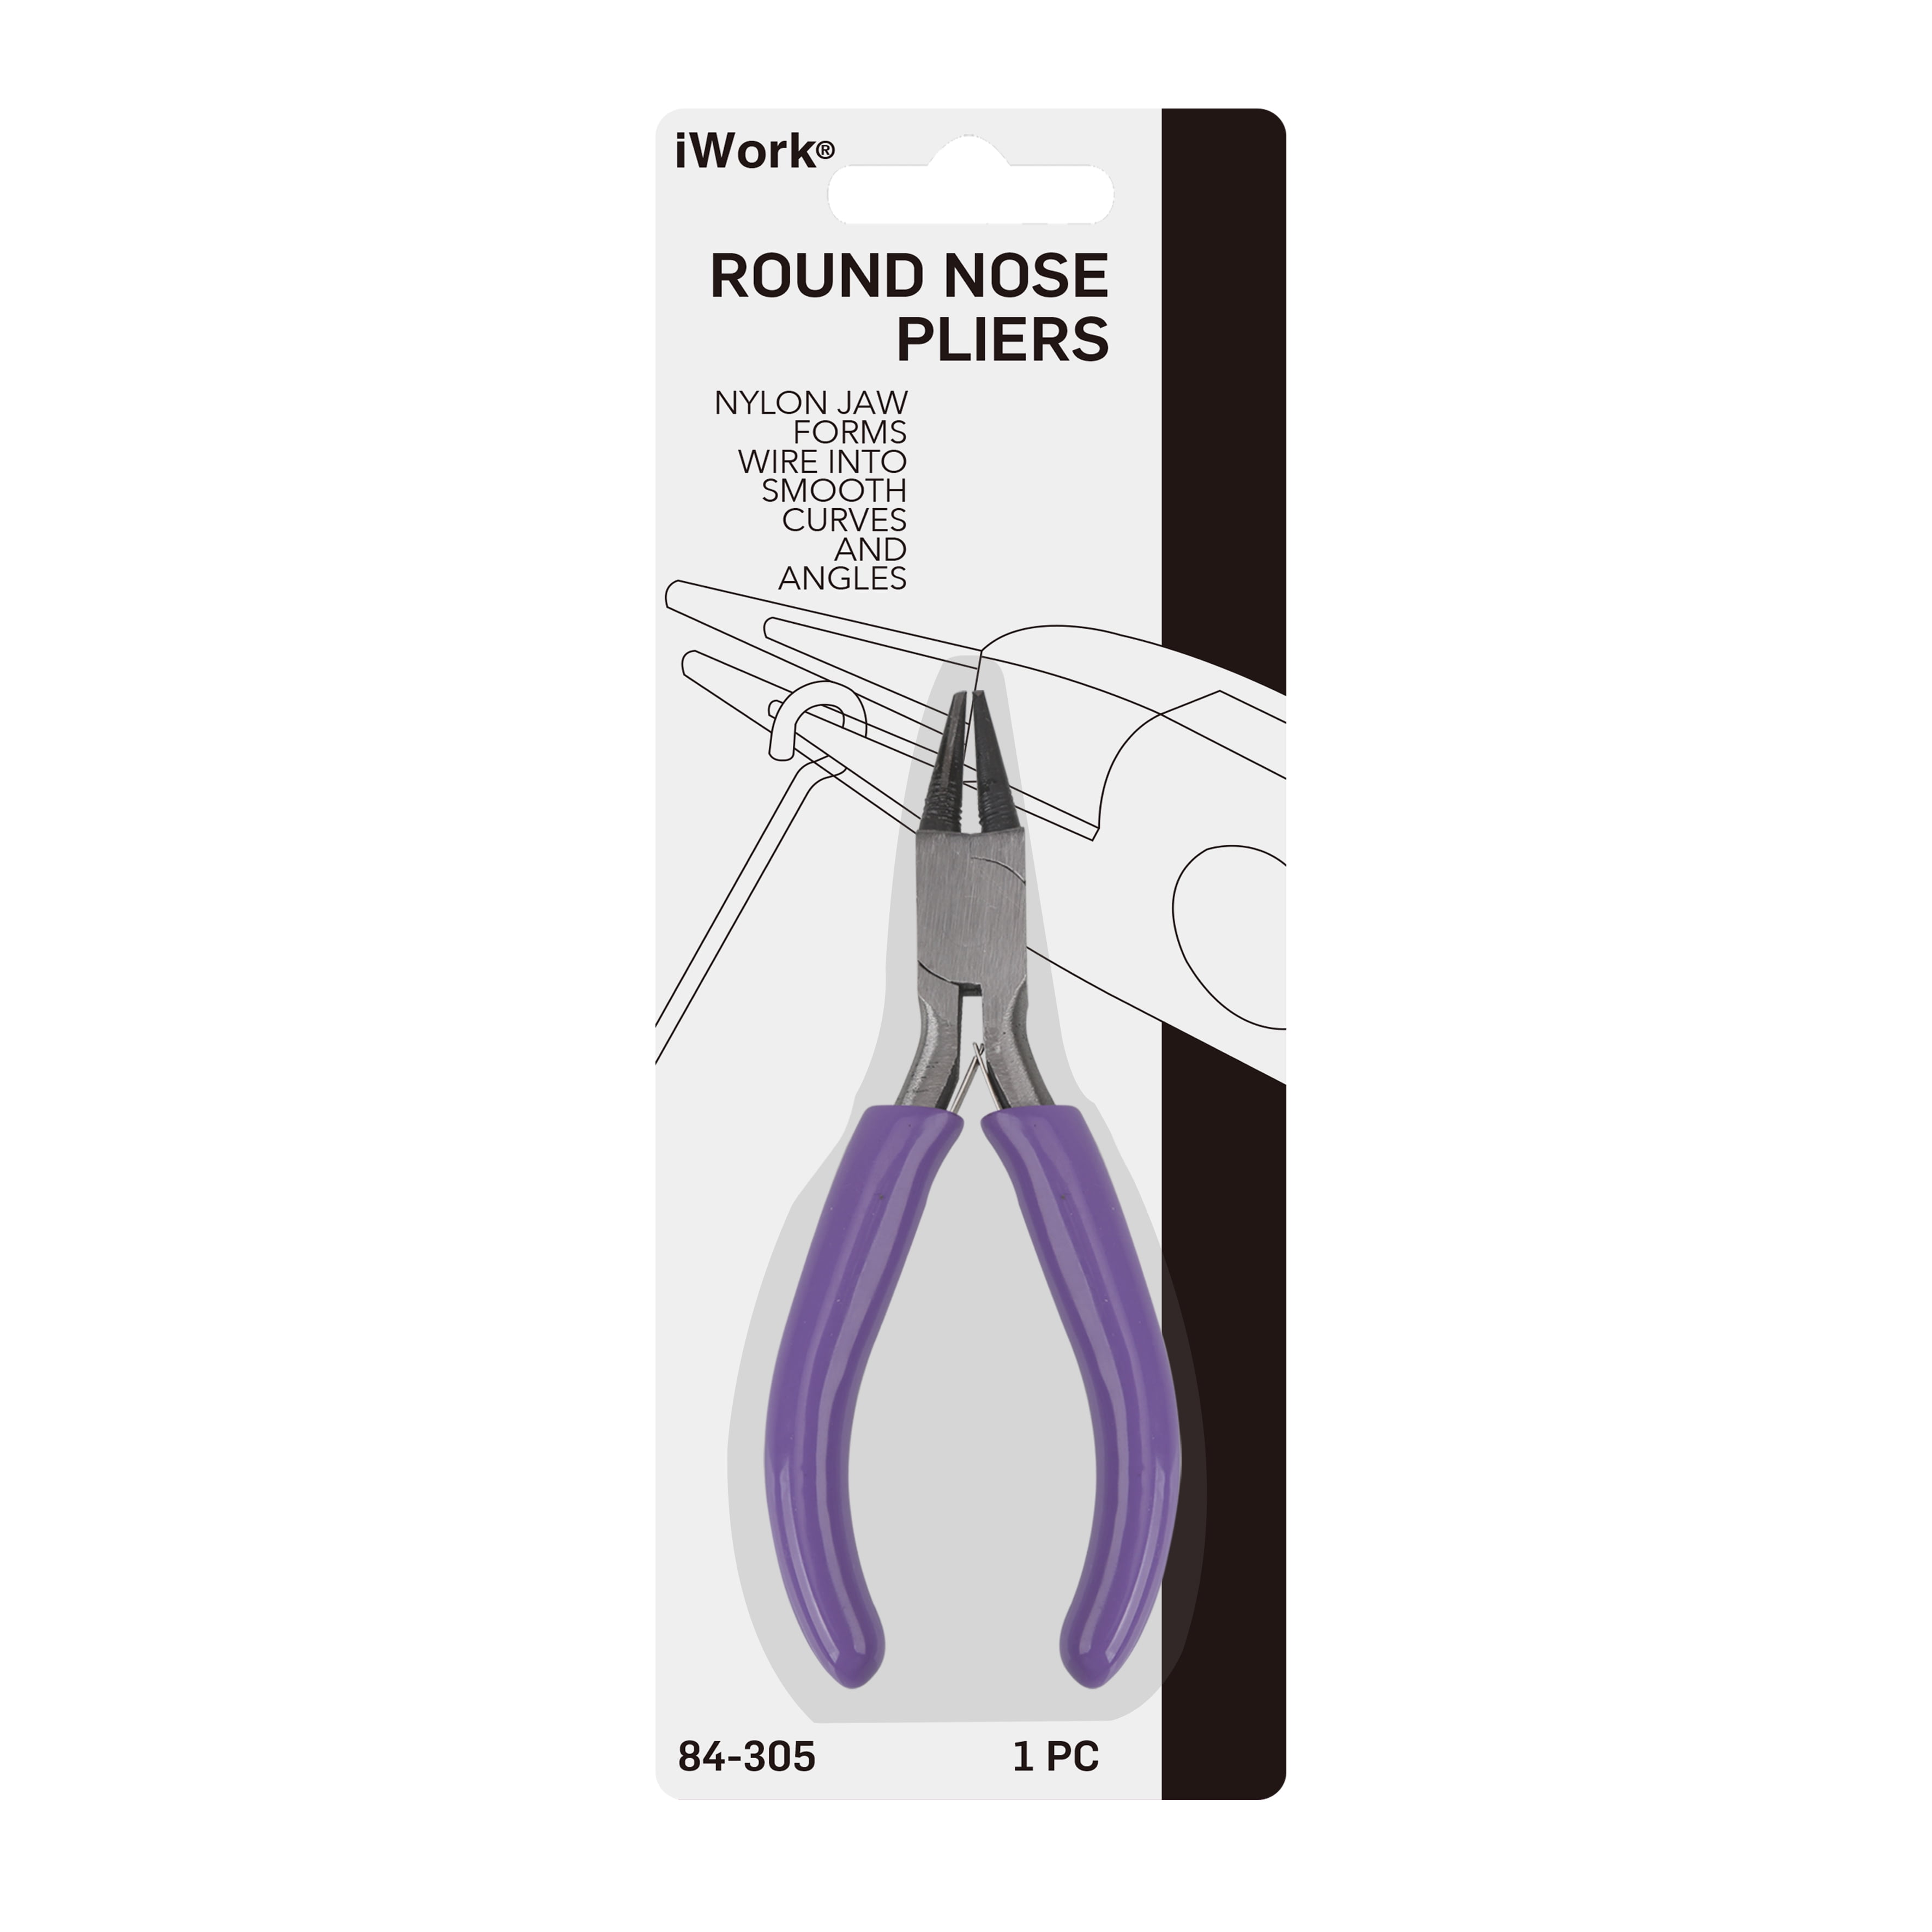 The BeadSmith Flat Nose Parallel Pliers